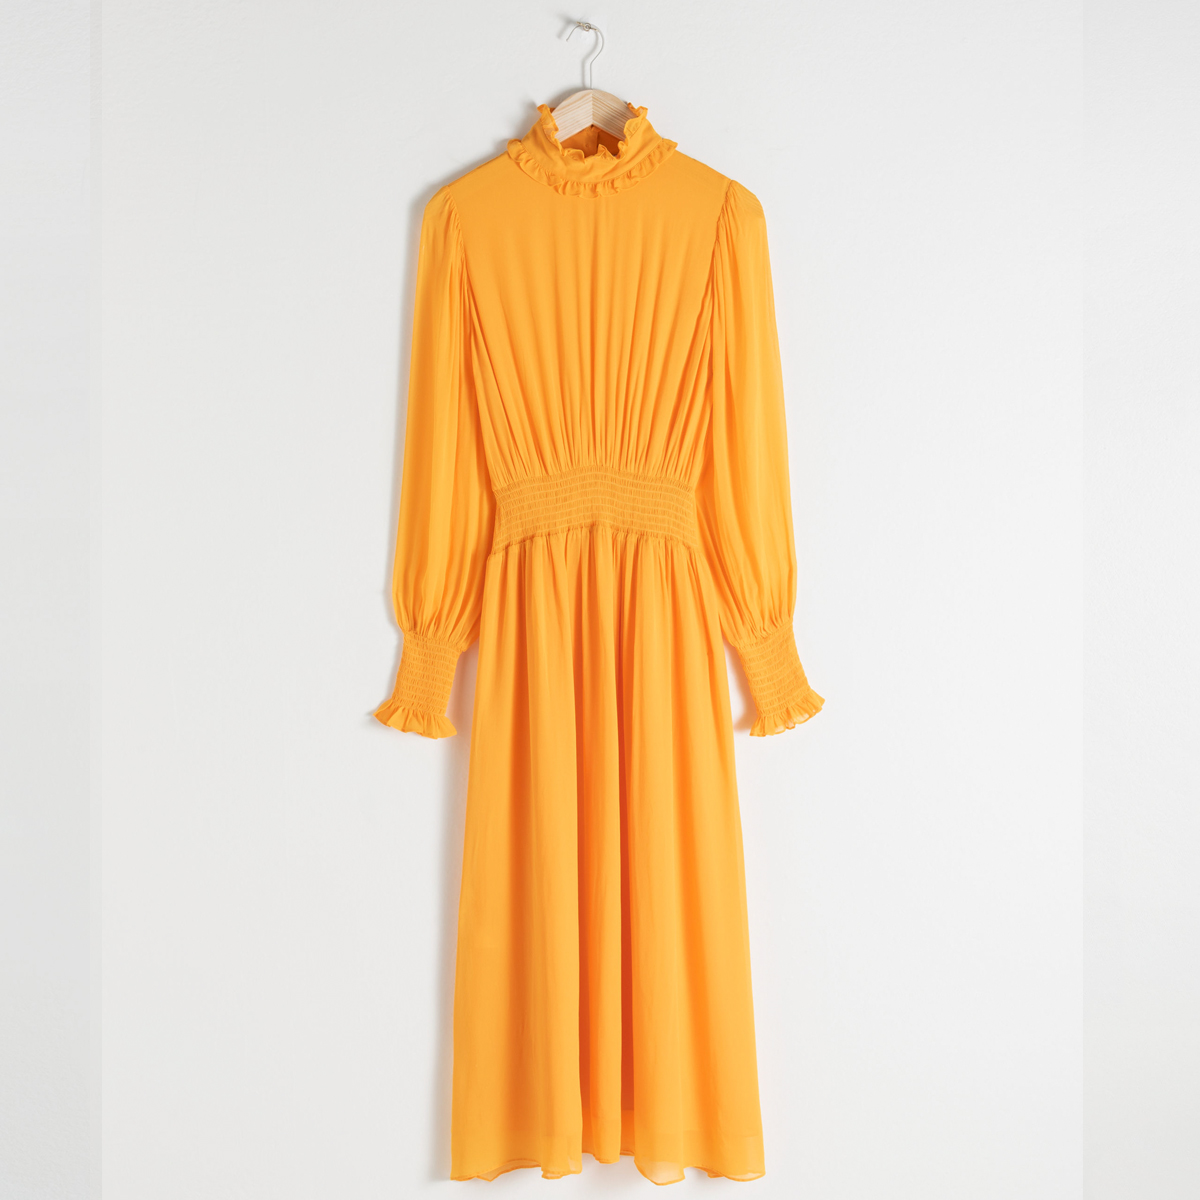 Wedding Guest Dresses: Other Stories 